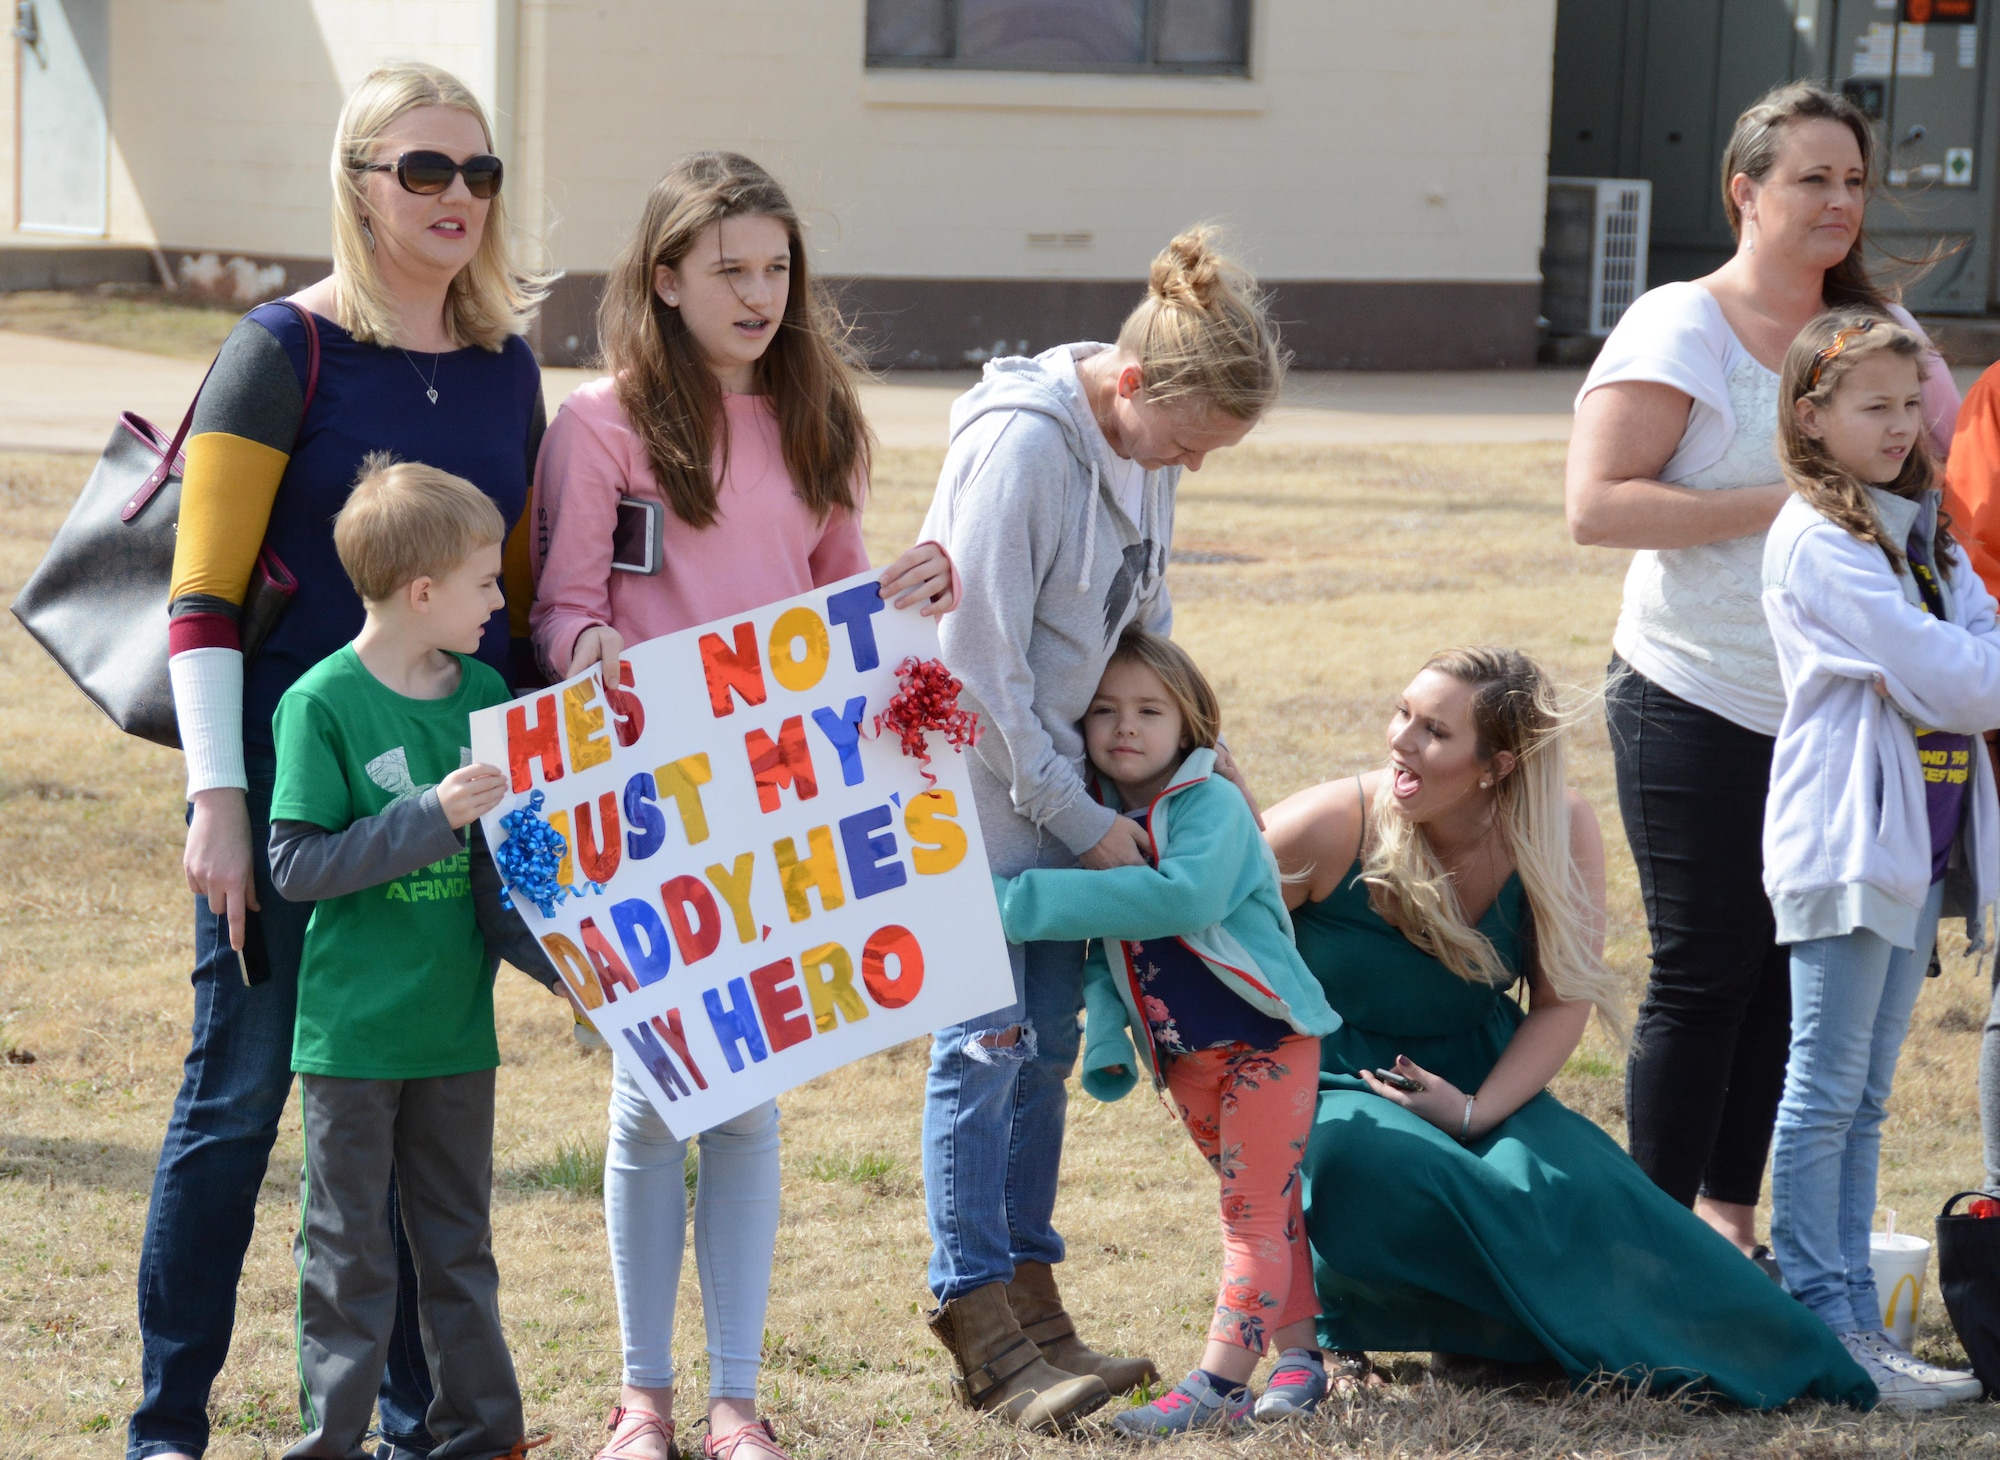 Racheal Geary and her children Courtney and Jacob await the arrival of her husband, Maj. Jason Geary, 507th Aircraft Maintenance Squadron commander, following a deployment Feb. 19, 2017, at Tinker Air Force Base, Okla. More than 90 Reservists deployed in December 2016 in support of air operations at Incirlik Air Base, Turkey, against the Islamic State group. (U.S. Air Force photo/Tech. Sgt. Lauren Gleason)